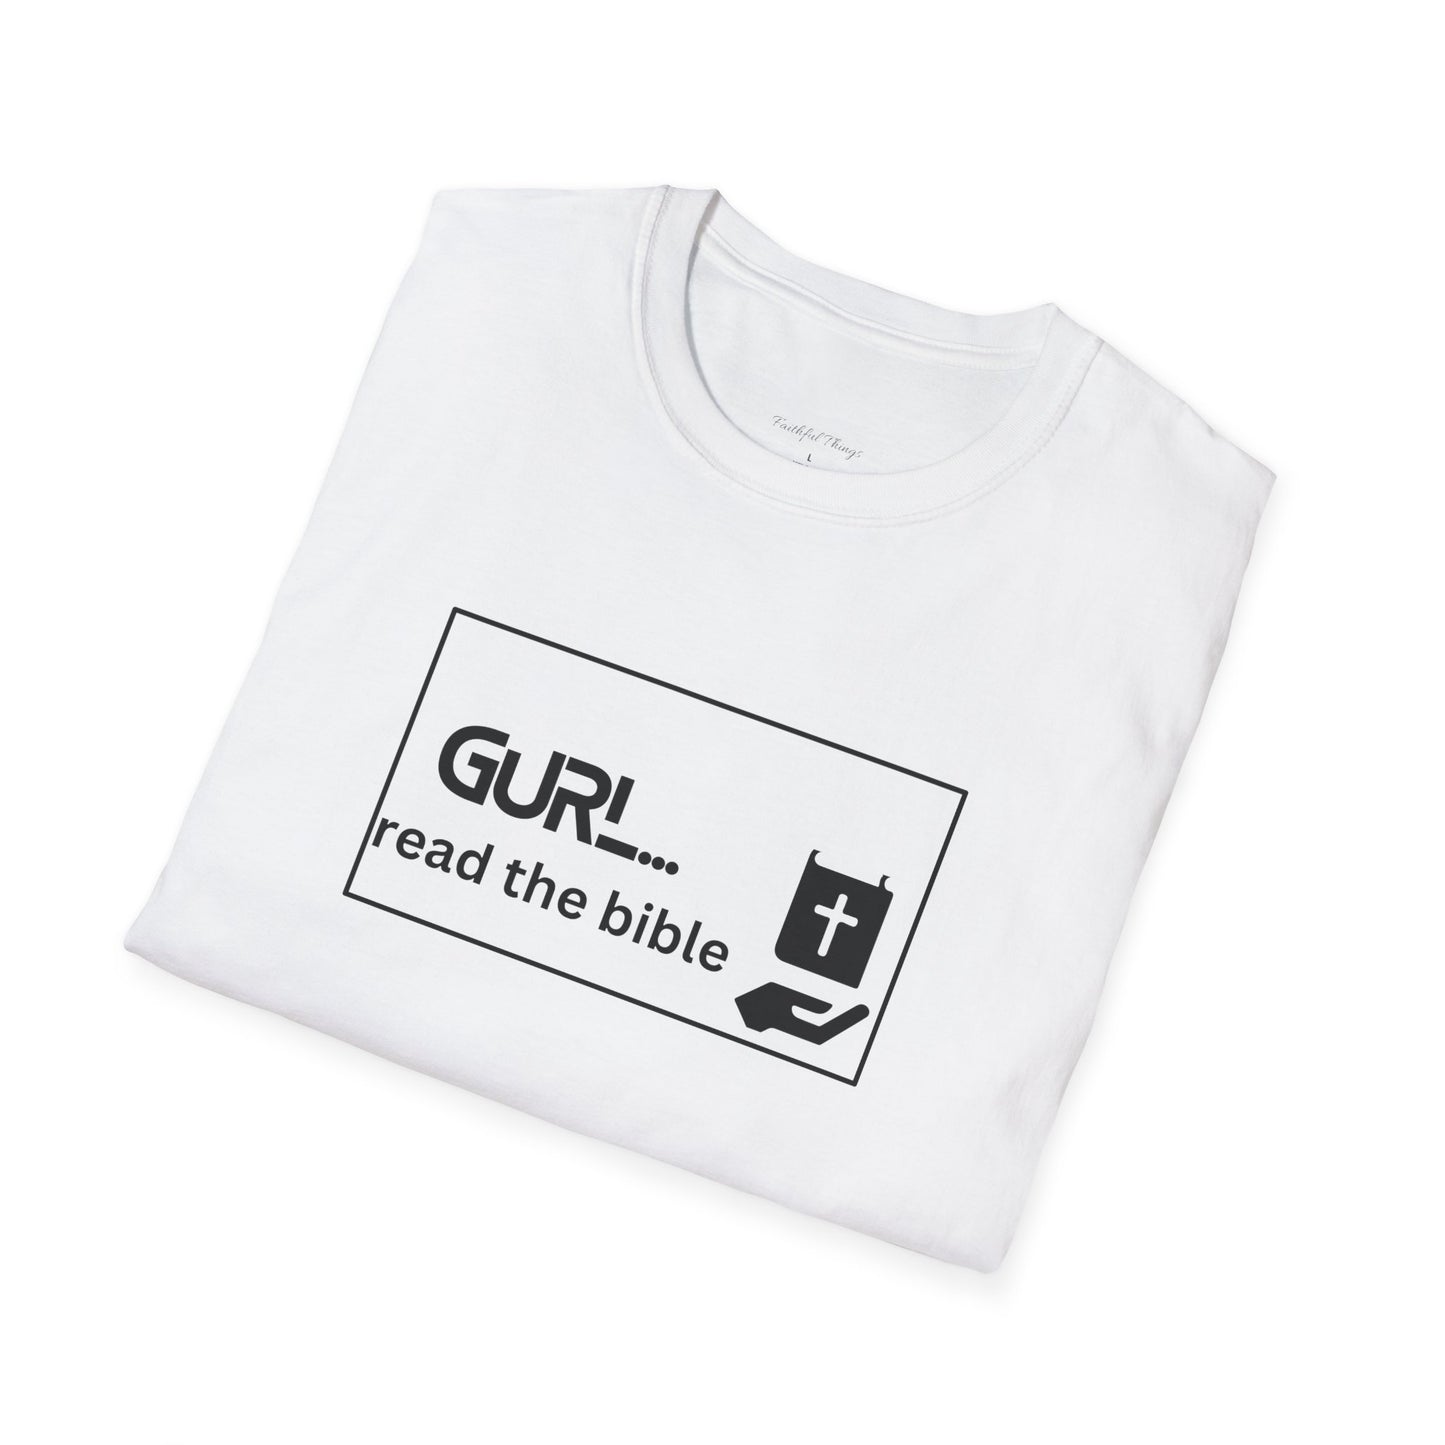 Gurl Read the Bible Tee for Women Soft Style T-Shirt